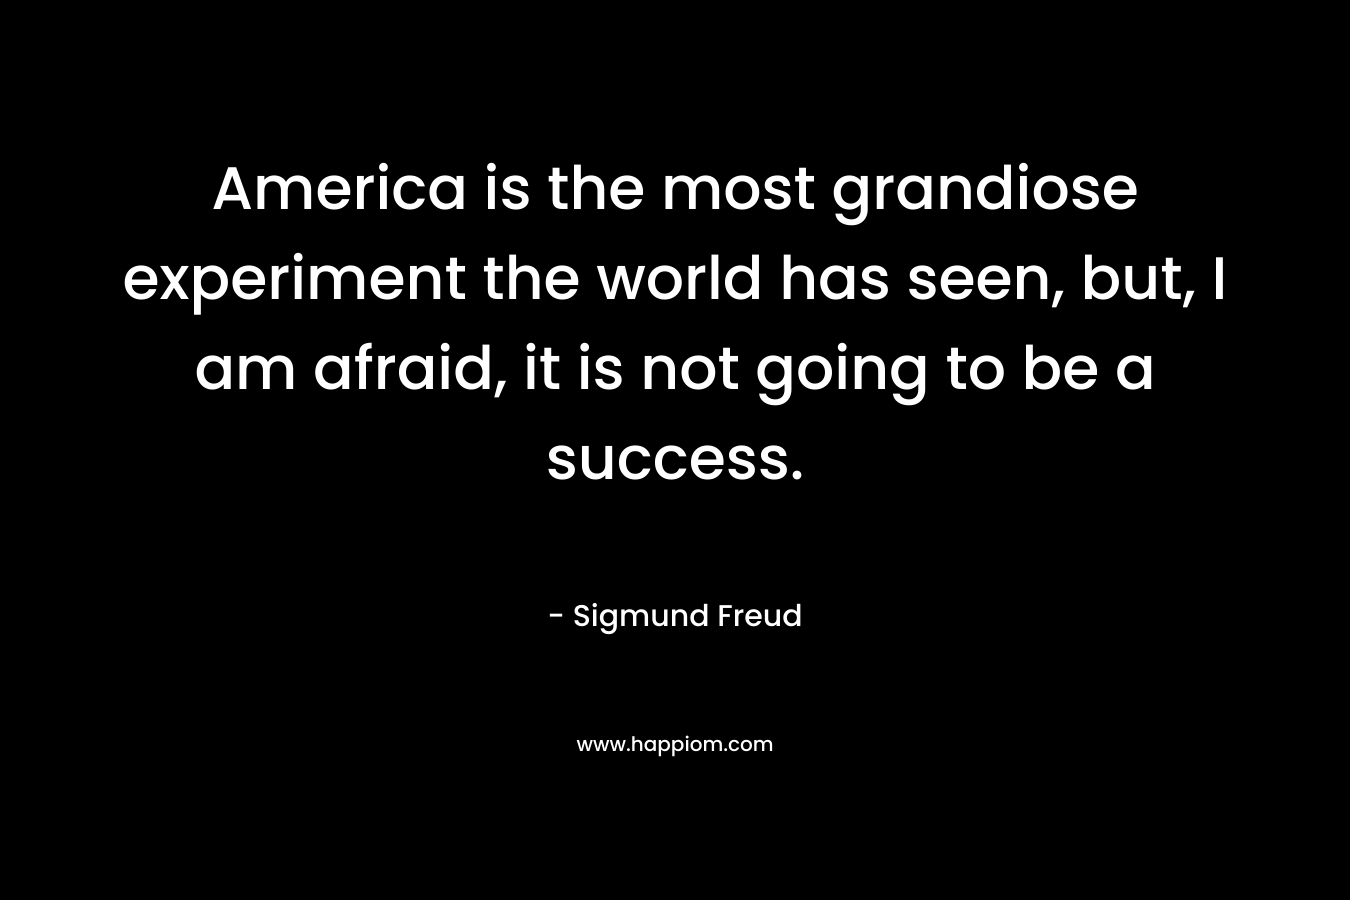 America is the most grandiose experiment the world has seen, but, I am afraid, it is not going to be a success. – Sigmund Freud